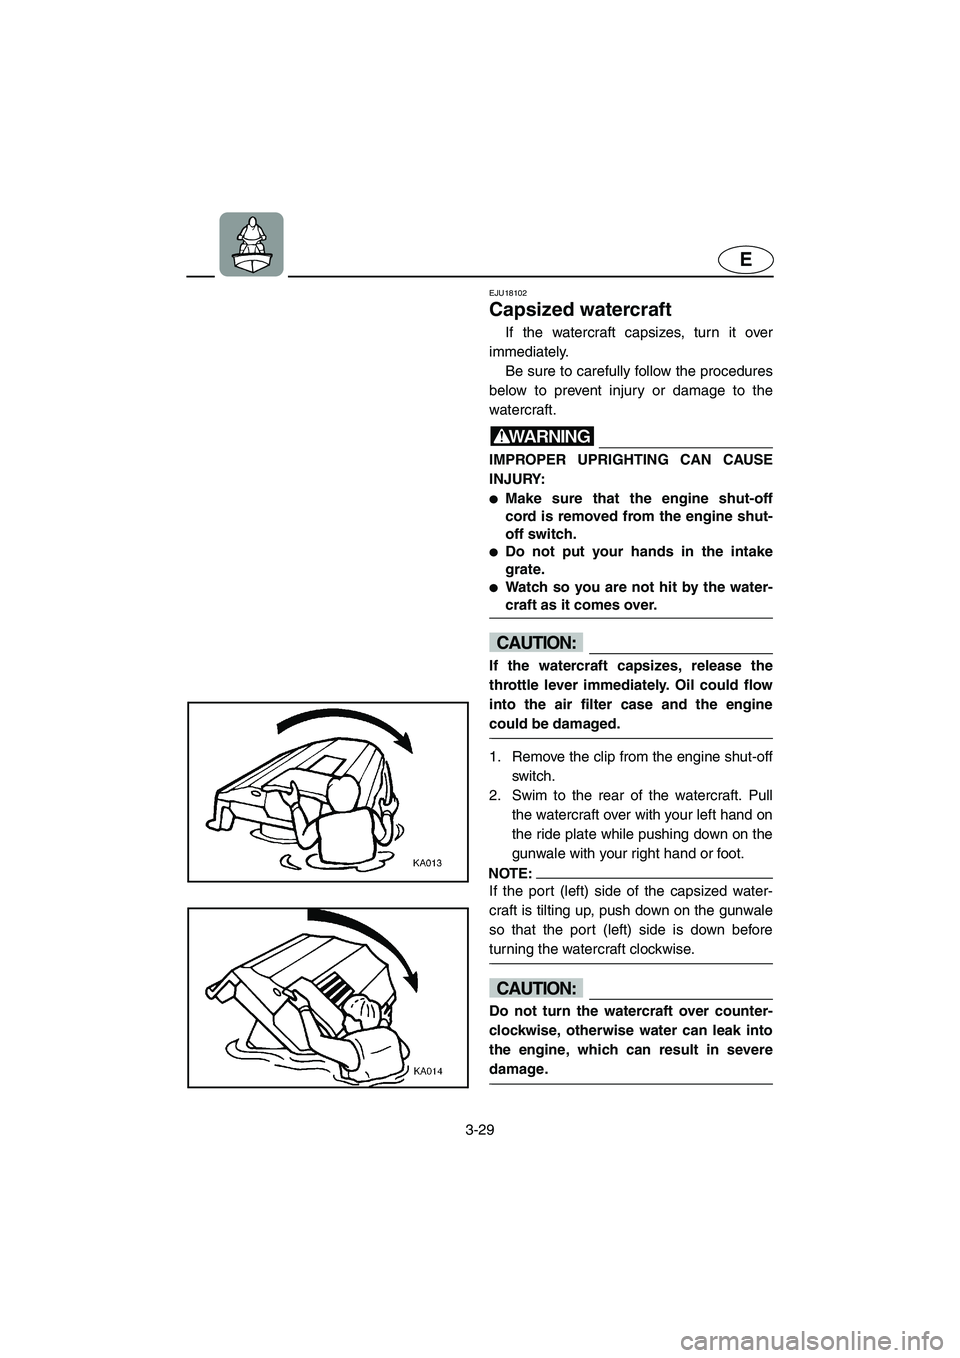 YAMAHA FX HO 2006  Owners Manual 3-29
E
EJU18102 
Capsized watercraft 
If the watercraft capsizes, turn it over
immediately. 
Be sure to carefully follow the procedures
below to prevent injury or damage to the
watercraft.
WARNING@ IM